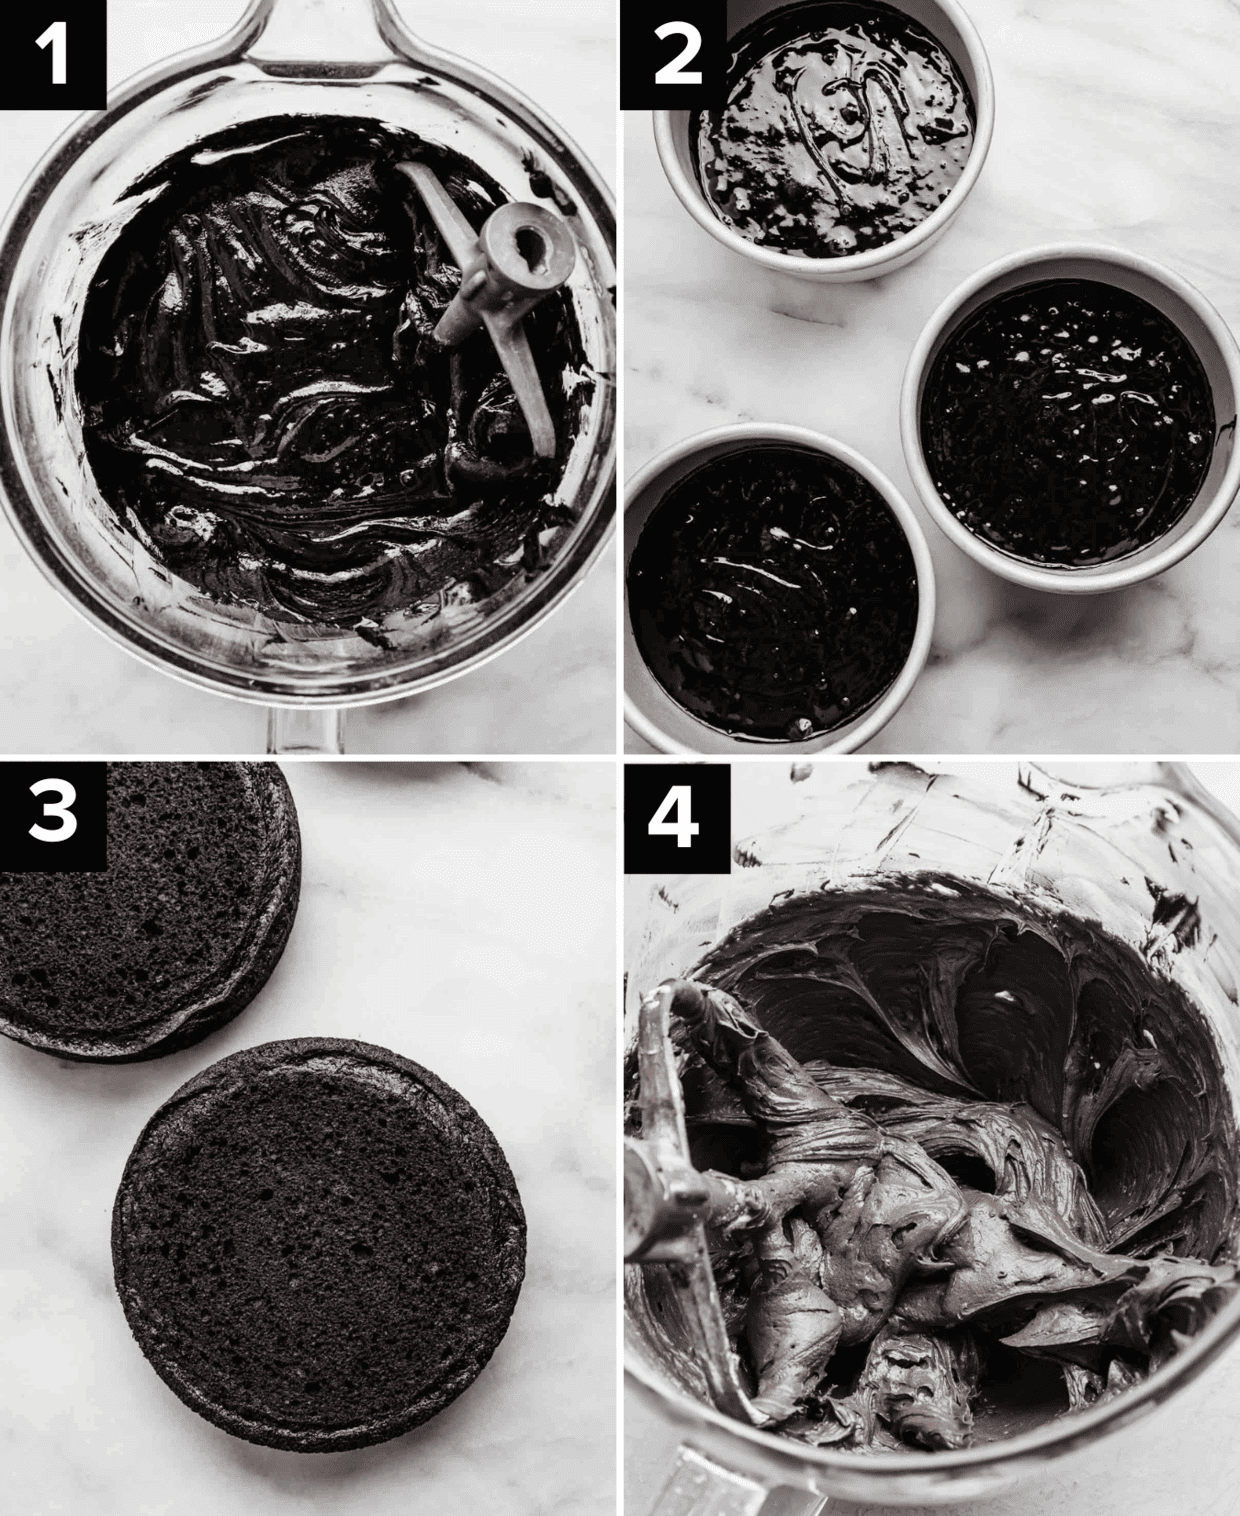 Four photos showing the process of how to make Black Velvet Cake batter.